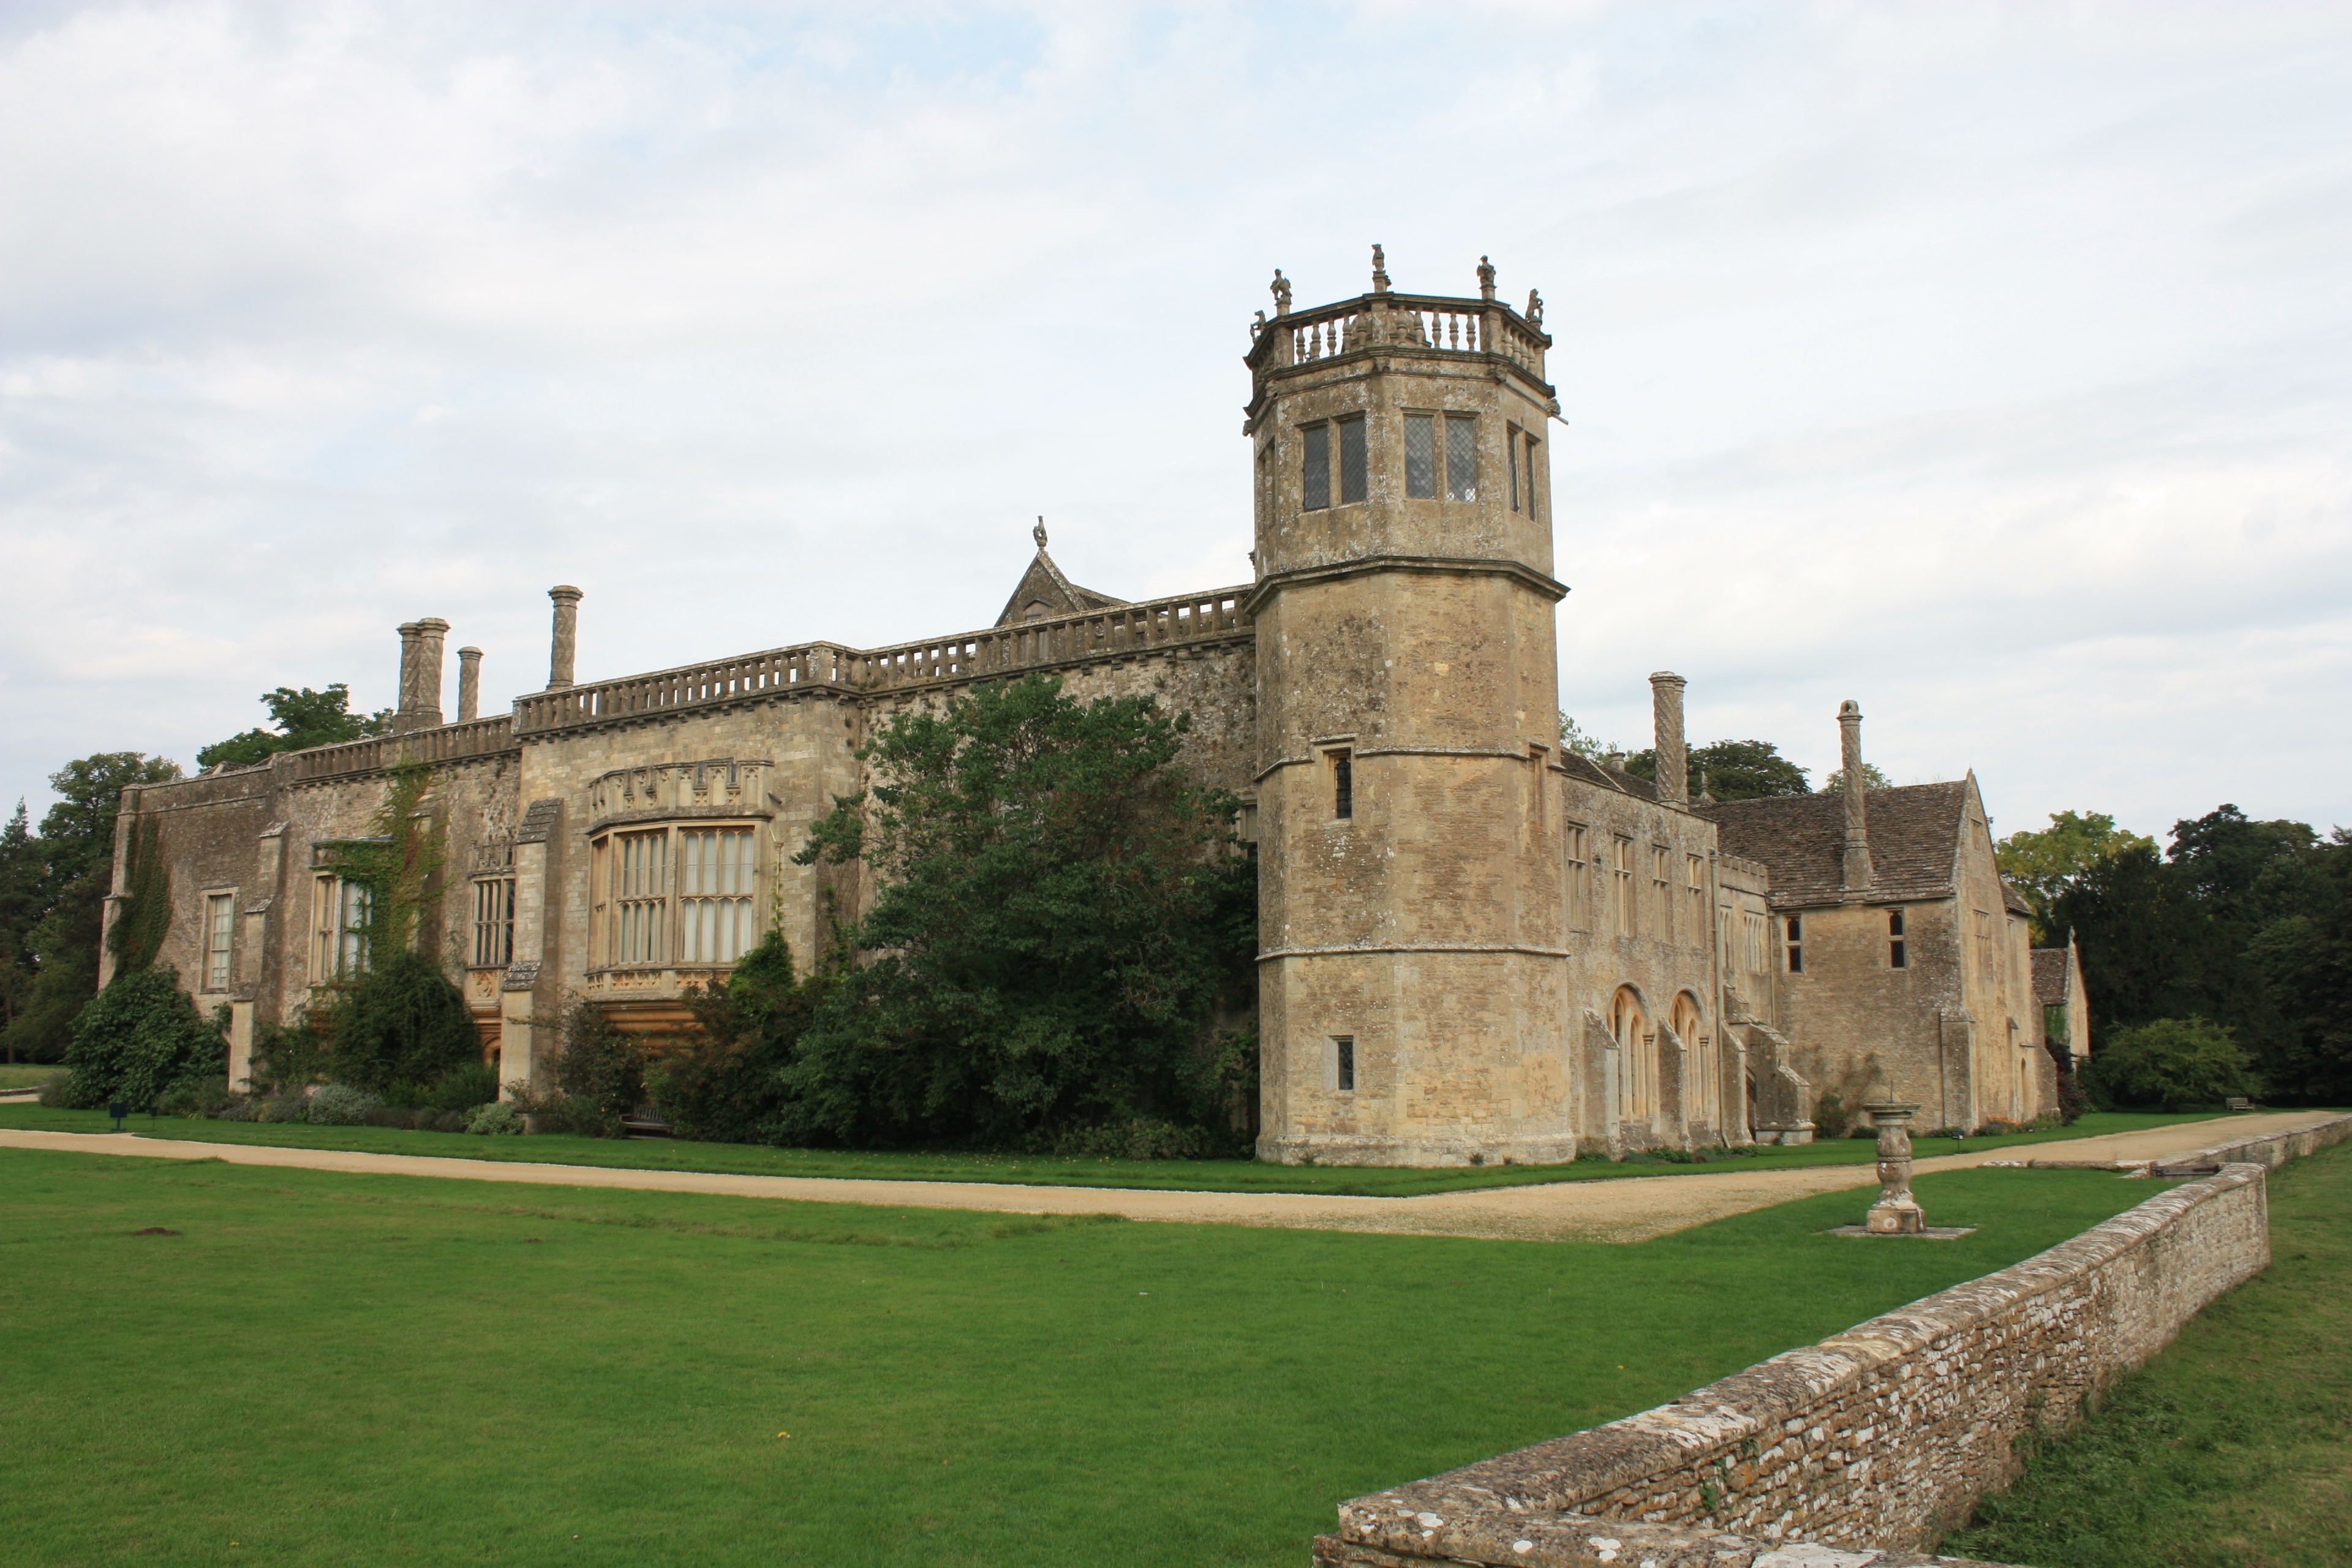 Lacock Abbey with stable yard